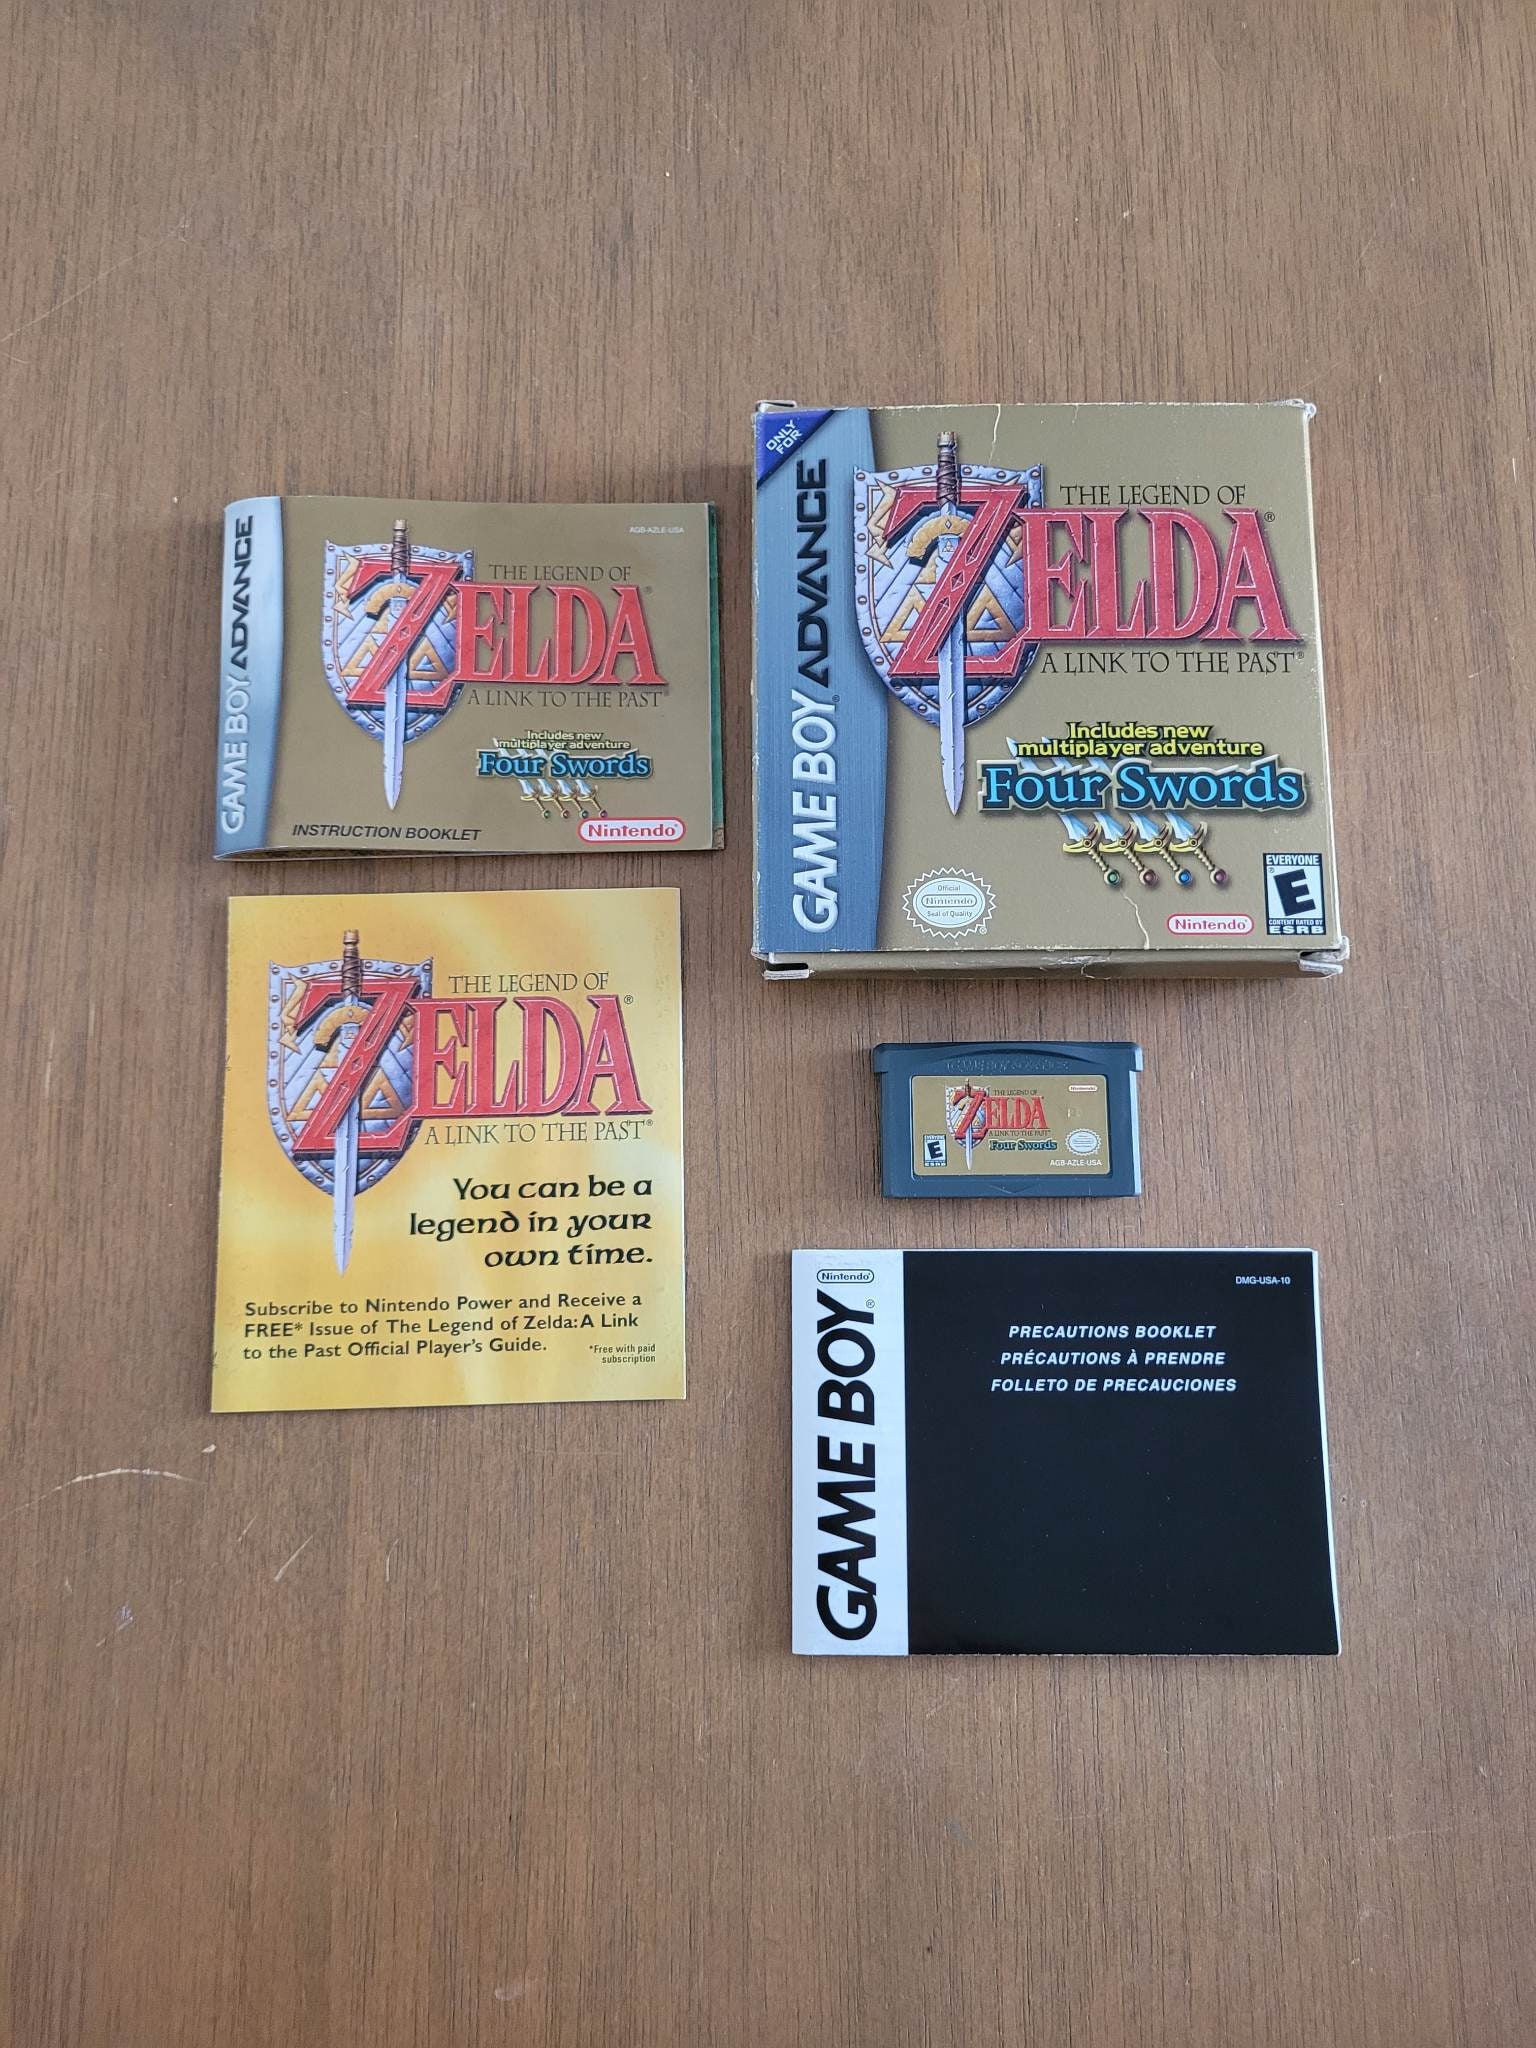 The Legend of Zelda: A Link to the past & Four swords GBA : r